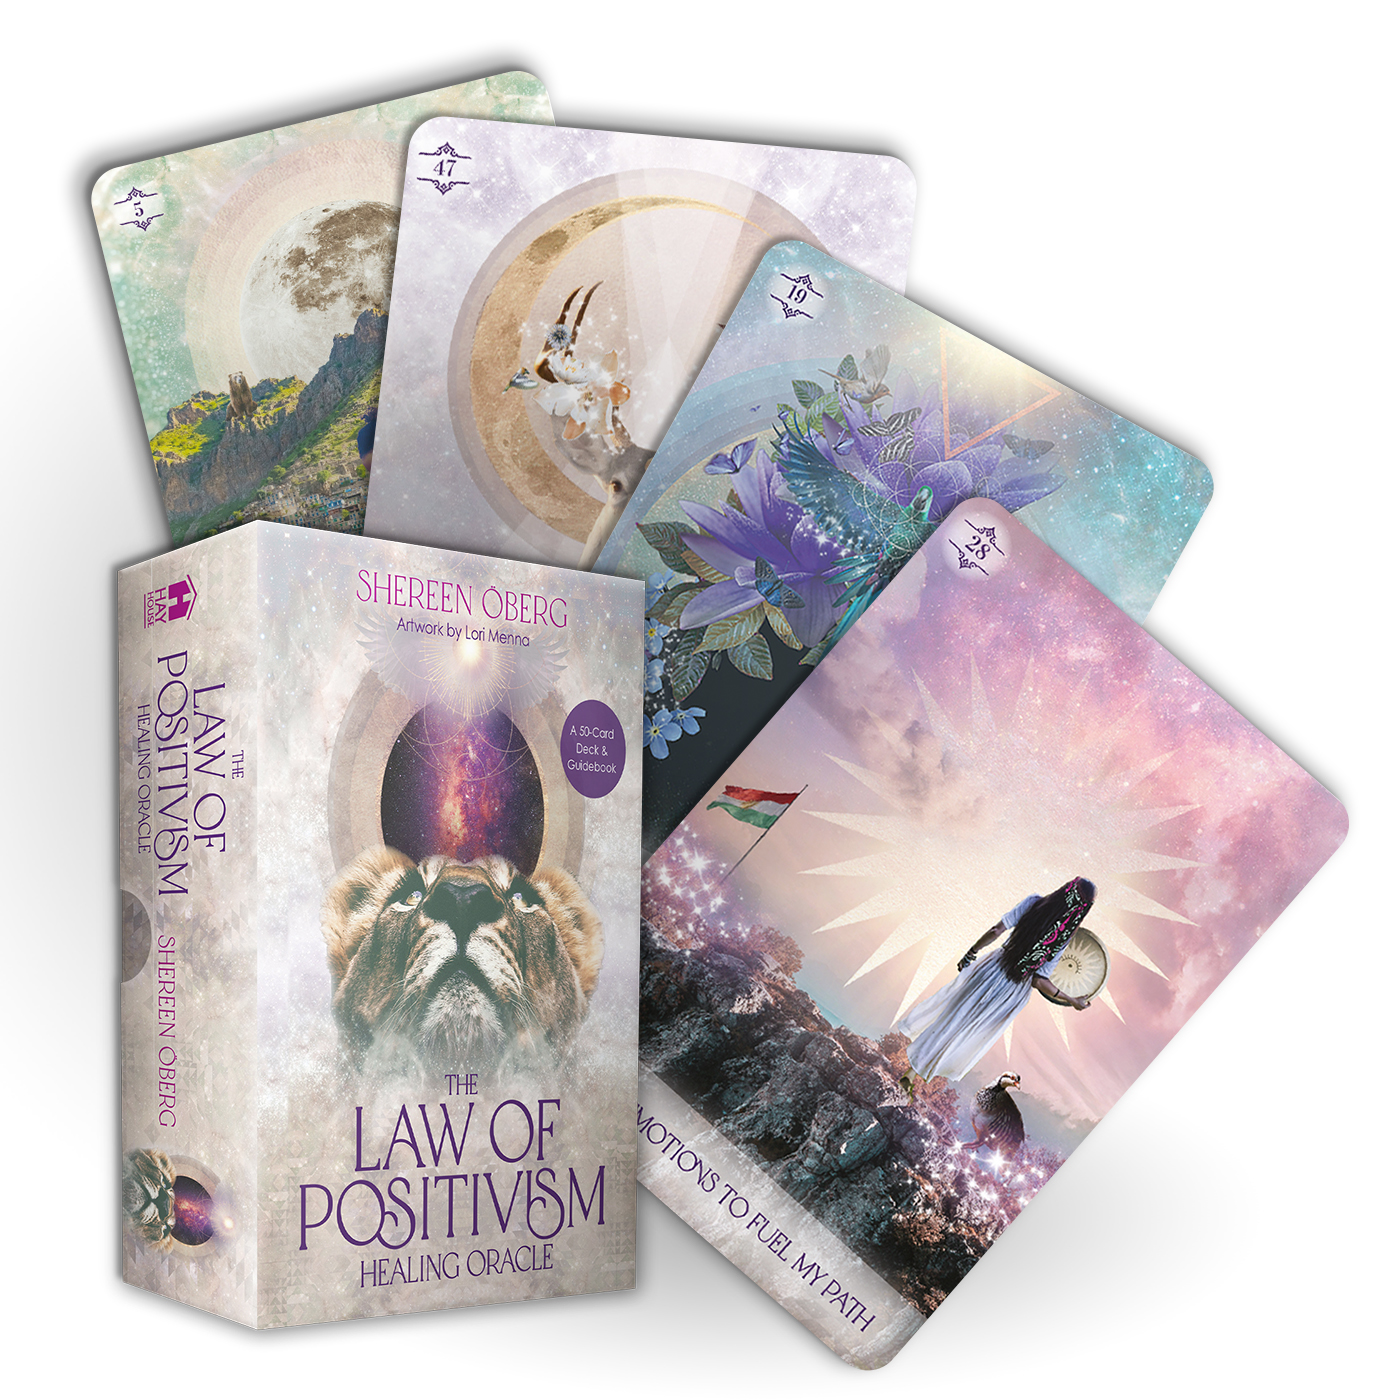 The Law of Positivism Healing Oracle: A 50-Card Deck and Guidebook